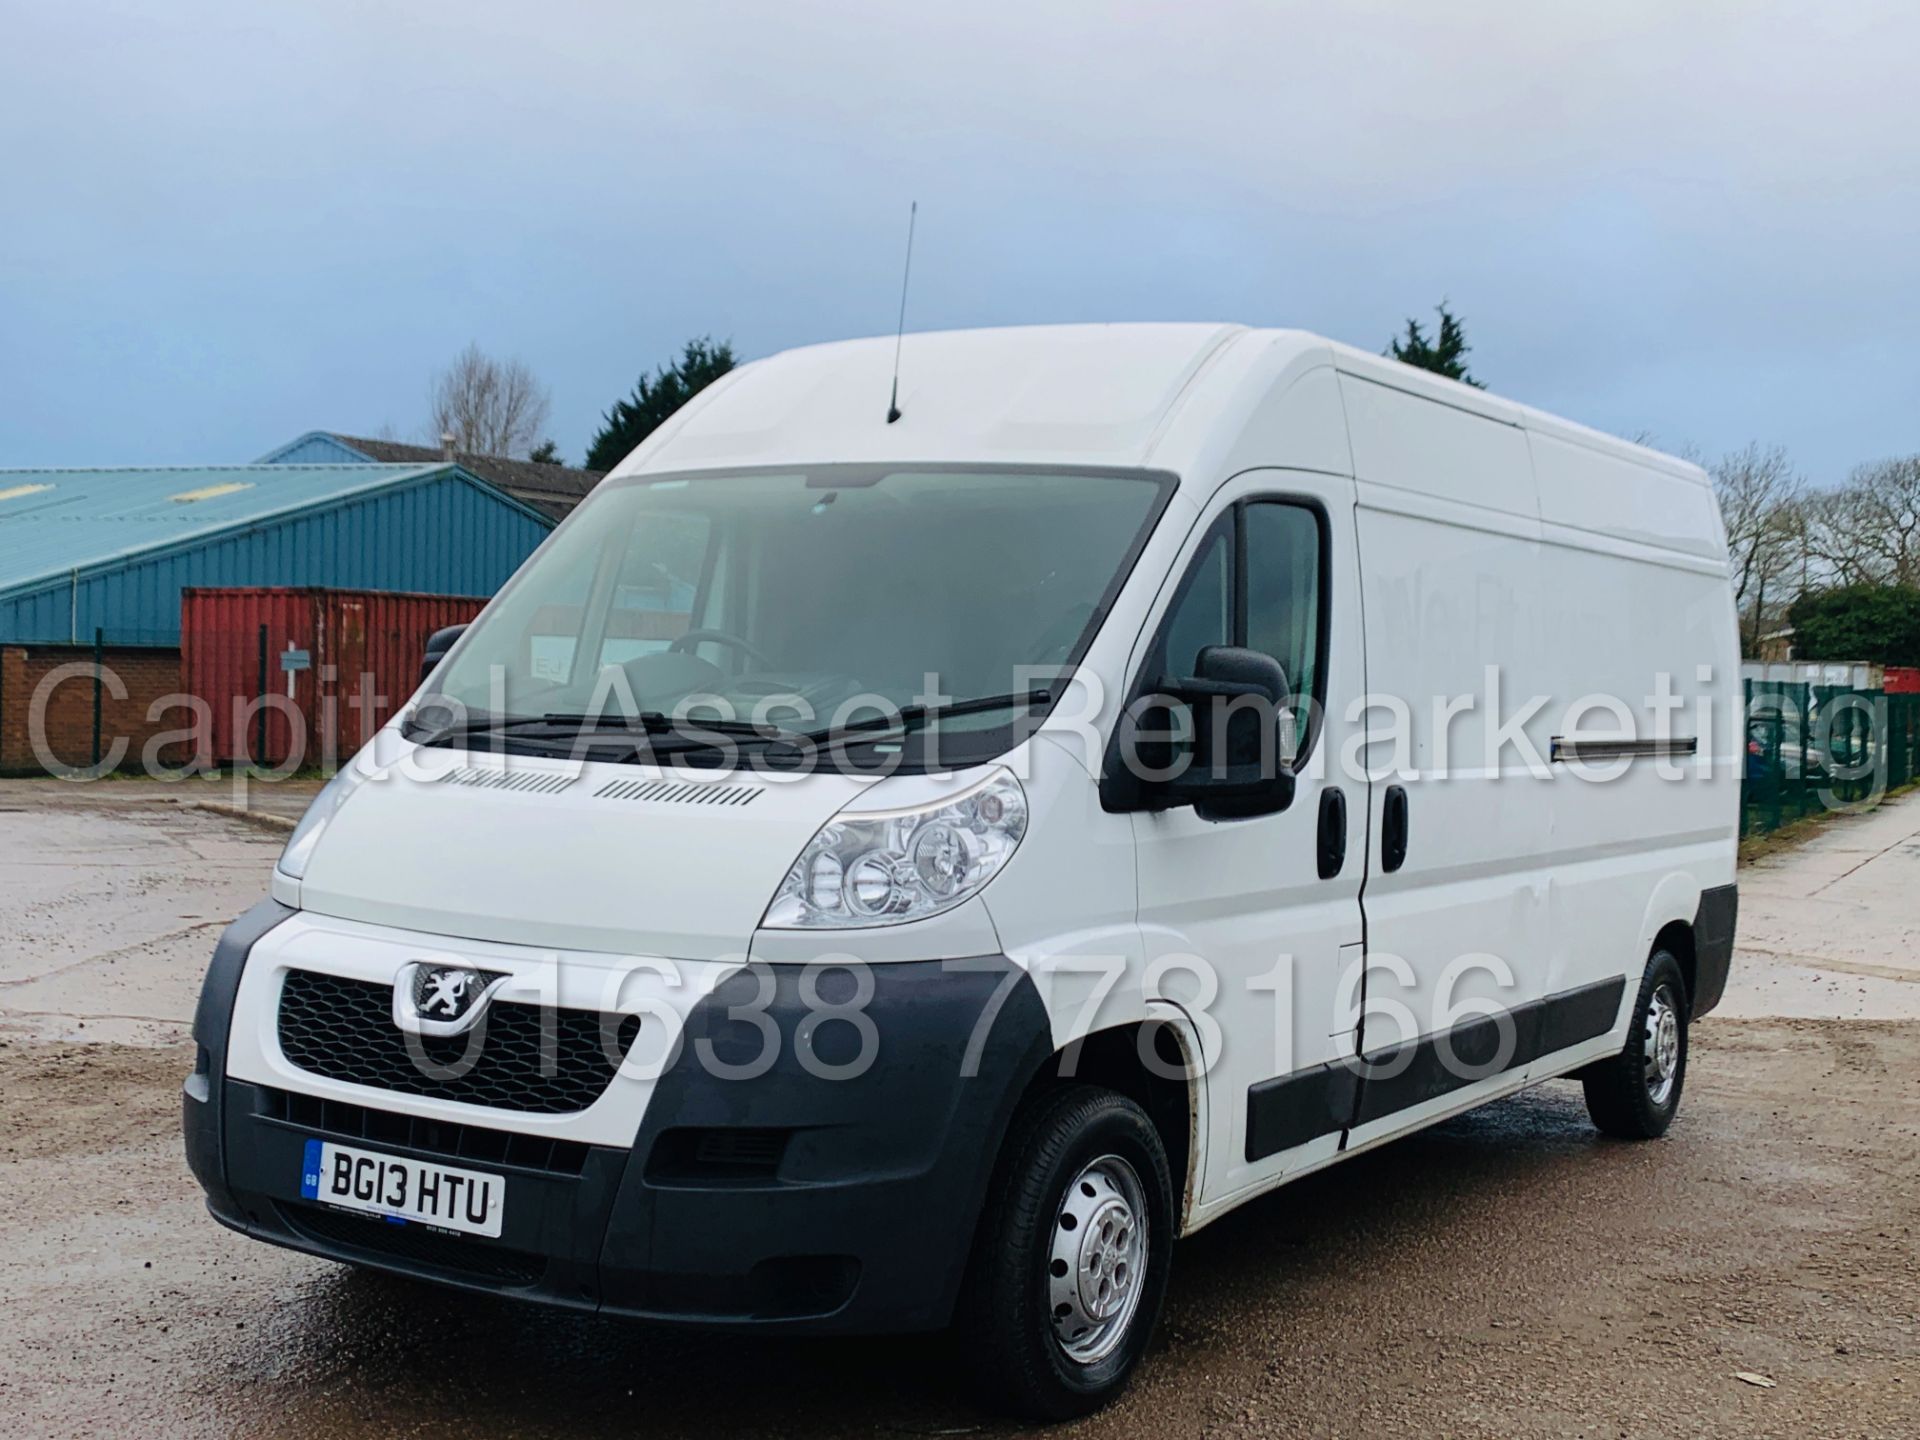 PEUGEOT BOXER 335 *LWB HI-ROOF* (2013) '2.2 HDI - 130 BHP - 6 SPEED' *ONLY 77,000 MILES* (NO VAT) - Image 5 of 31